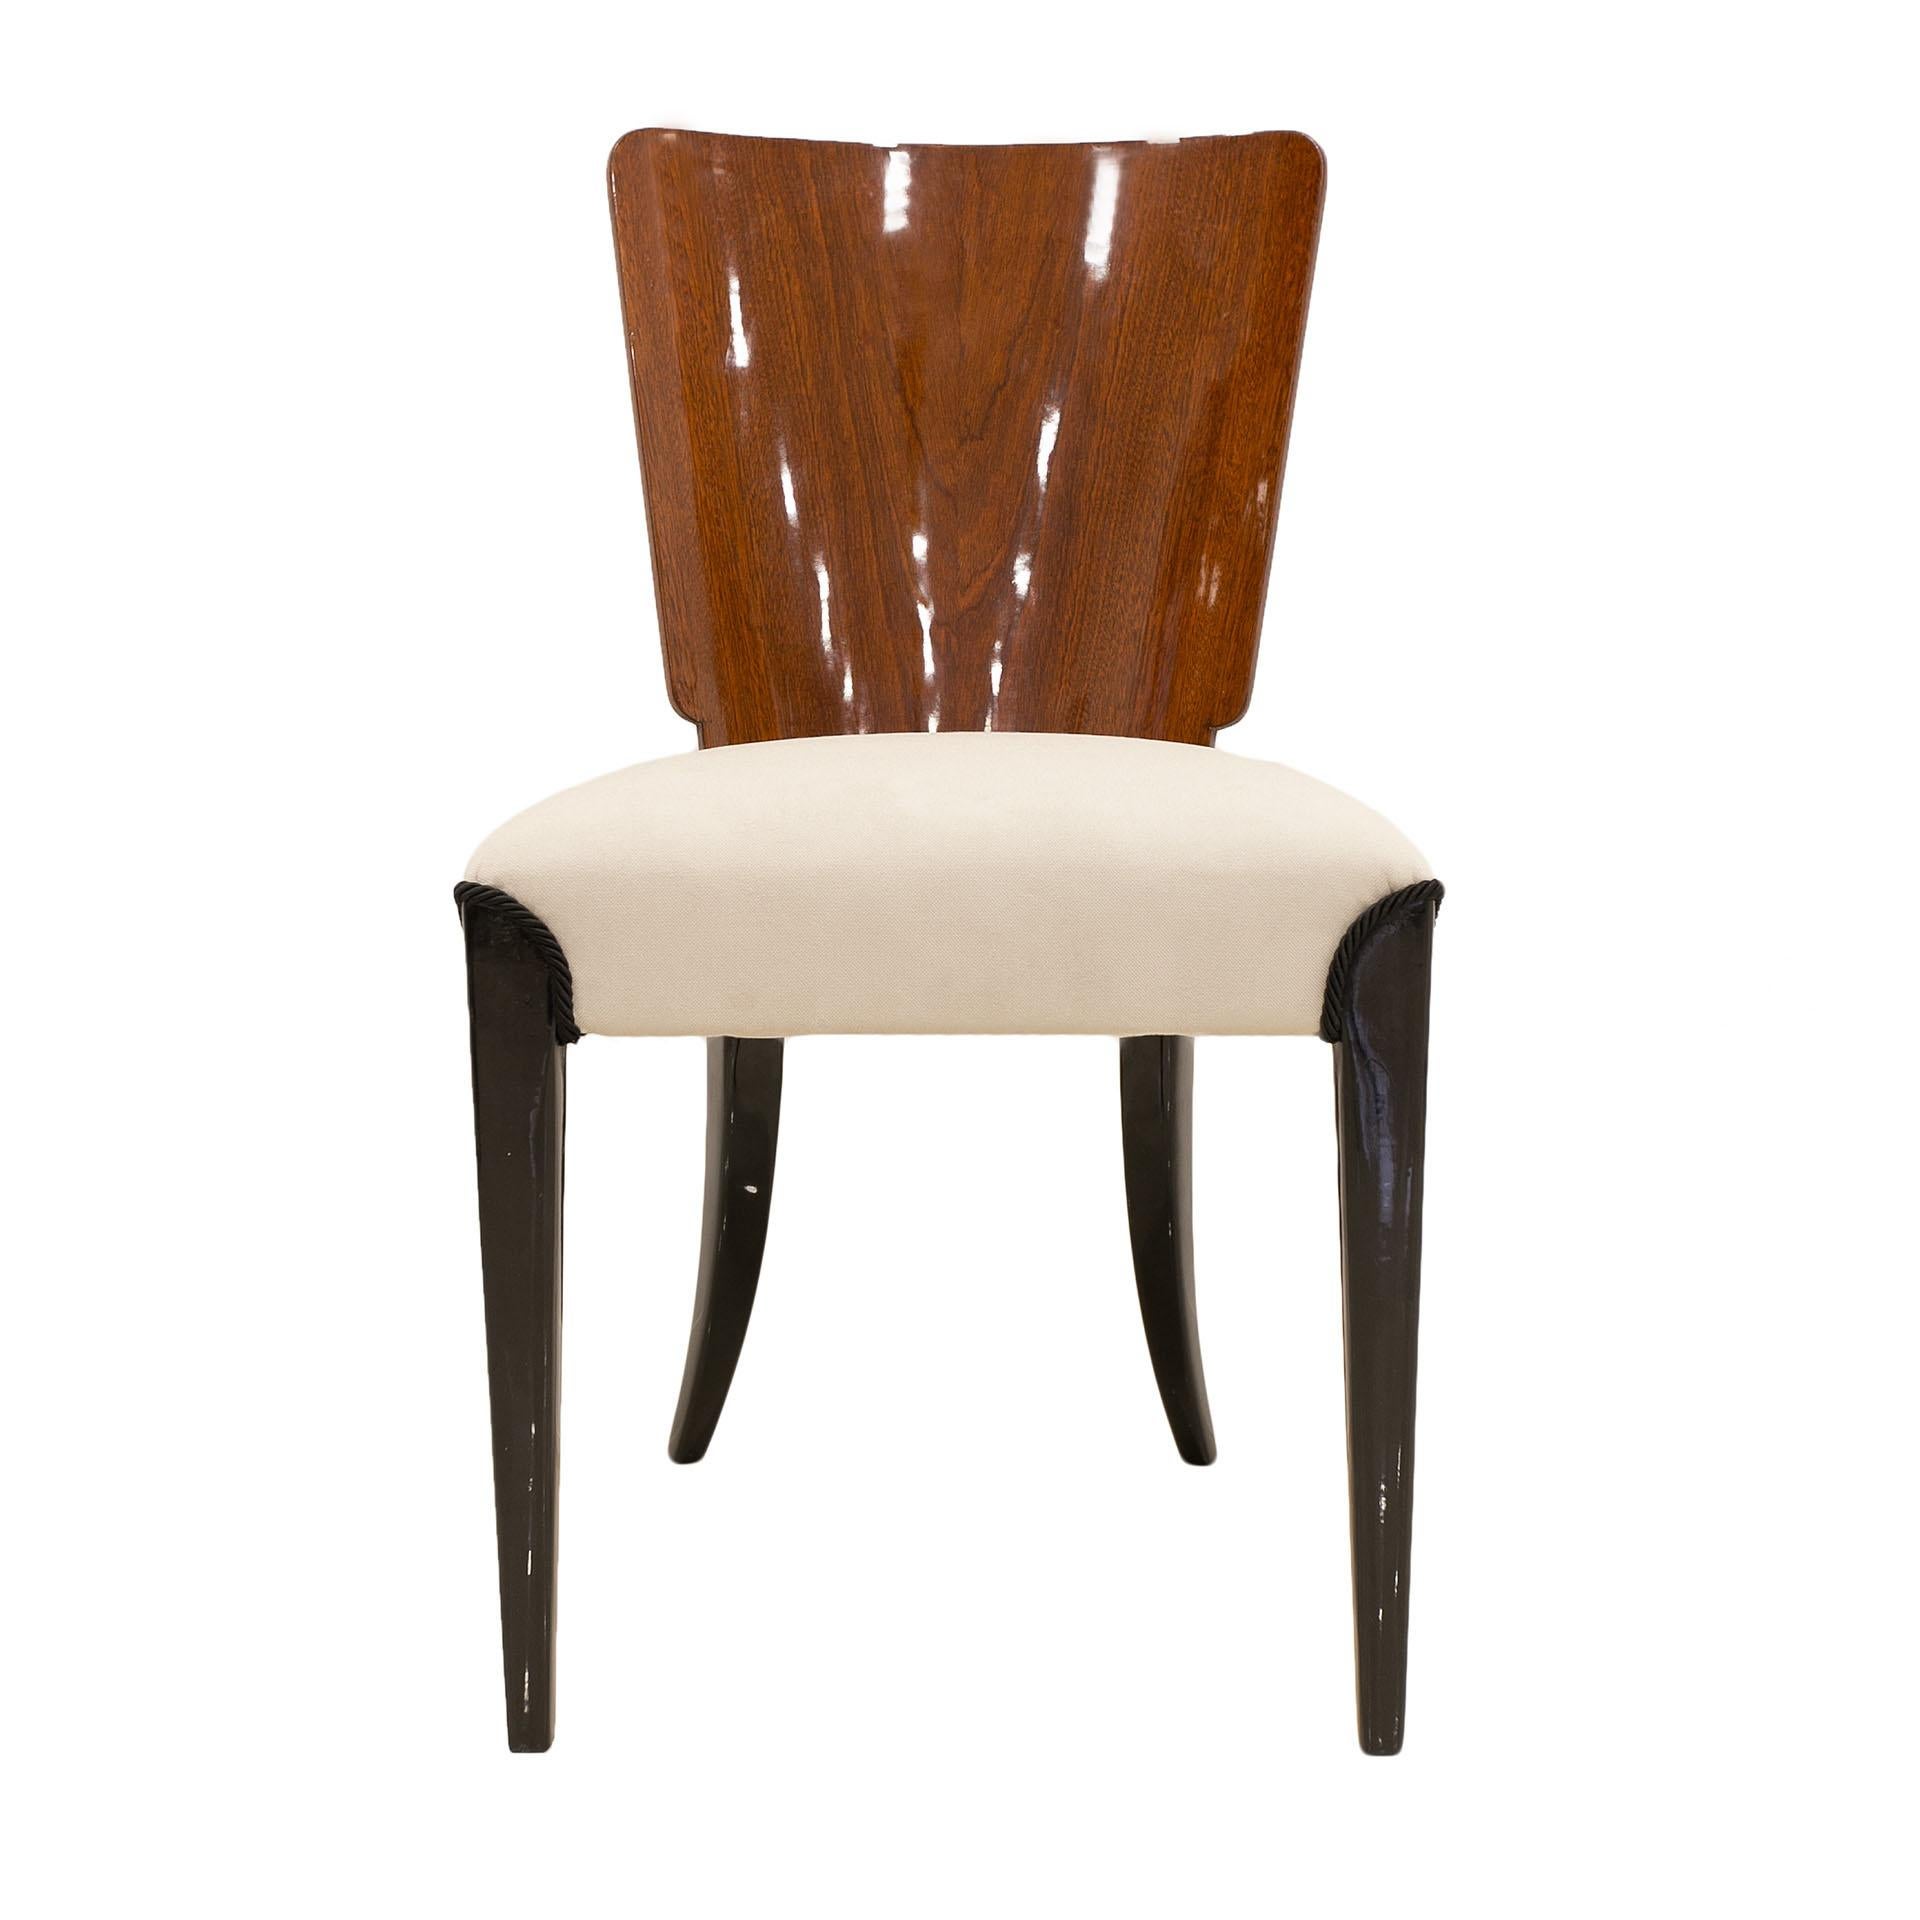 This set of four chairs was designed by Jindrich Halabala, a prominent Czech modernism designer, and produced in Czechoslovakia in the 1930s. The chairs are lightweight, functional, designed with a great sense of form, even though they are nearly 90